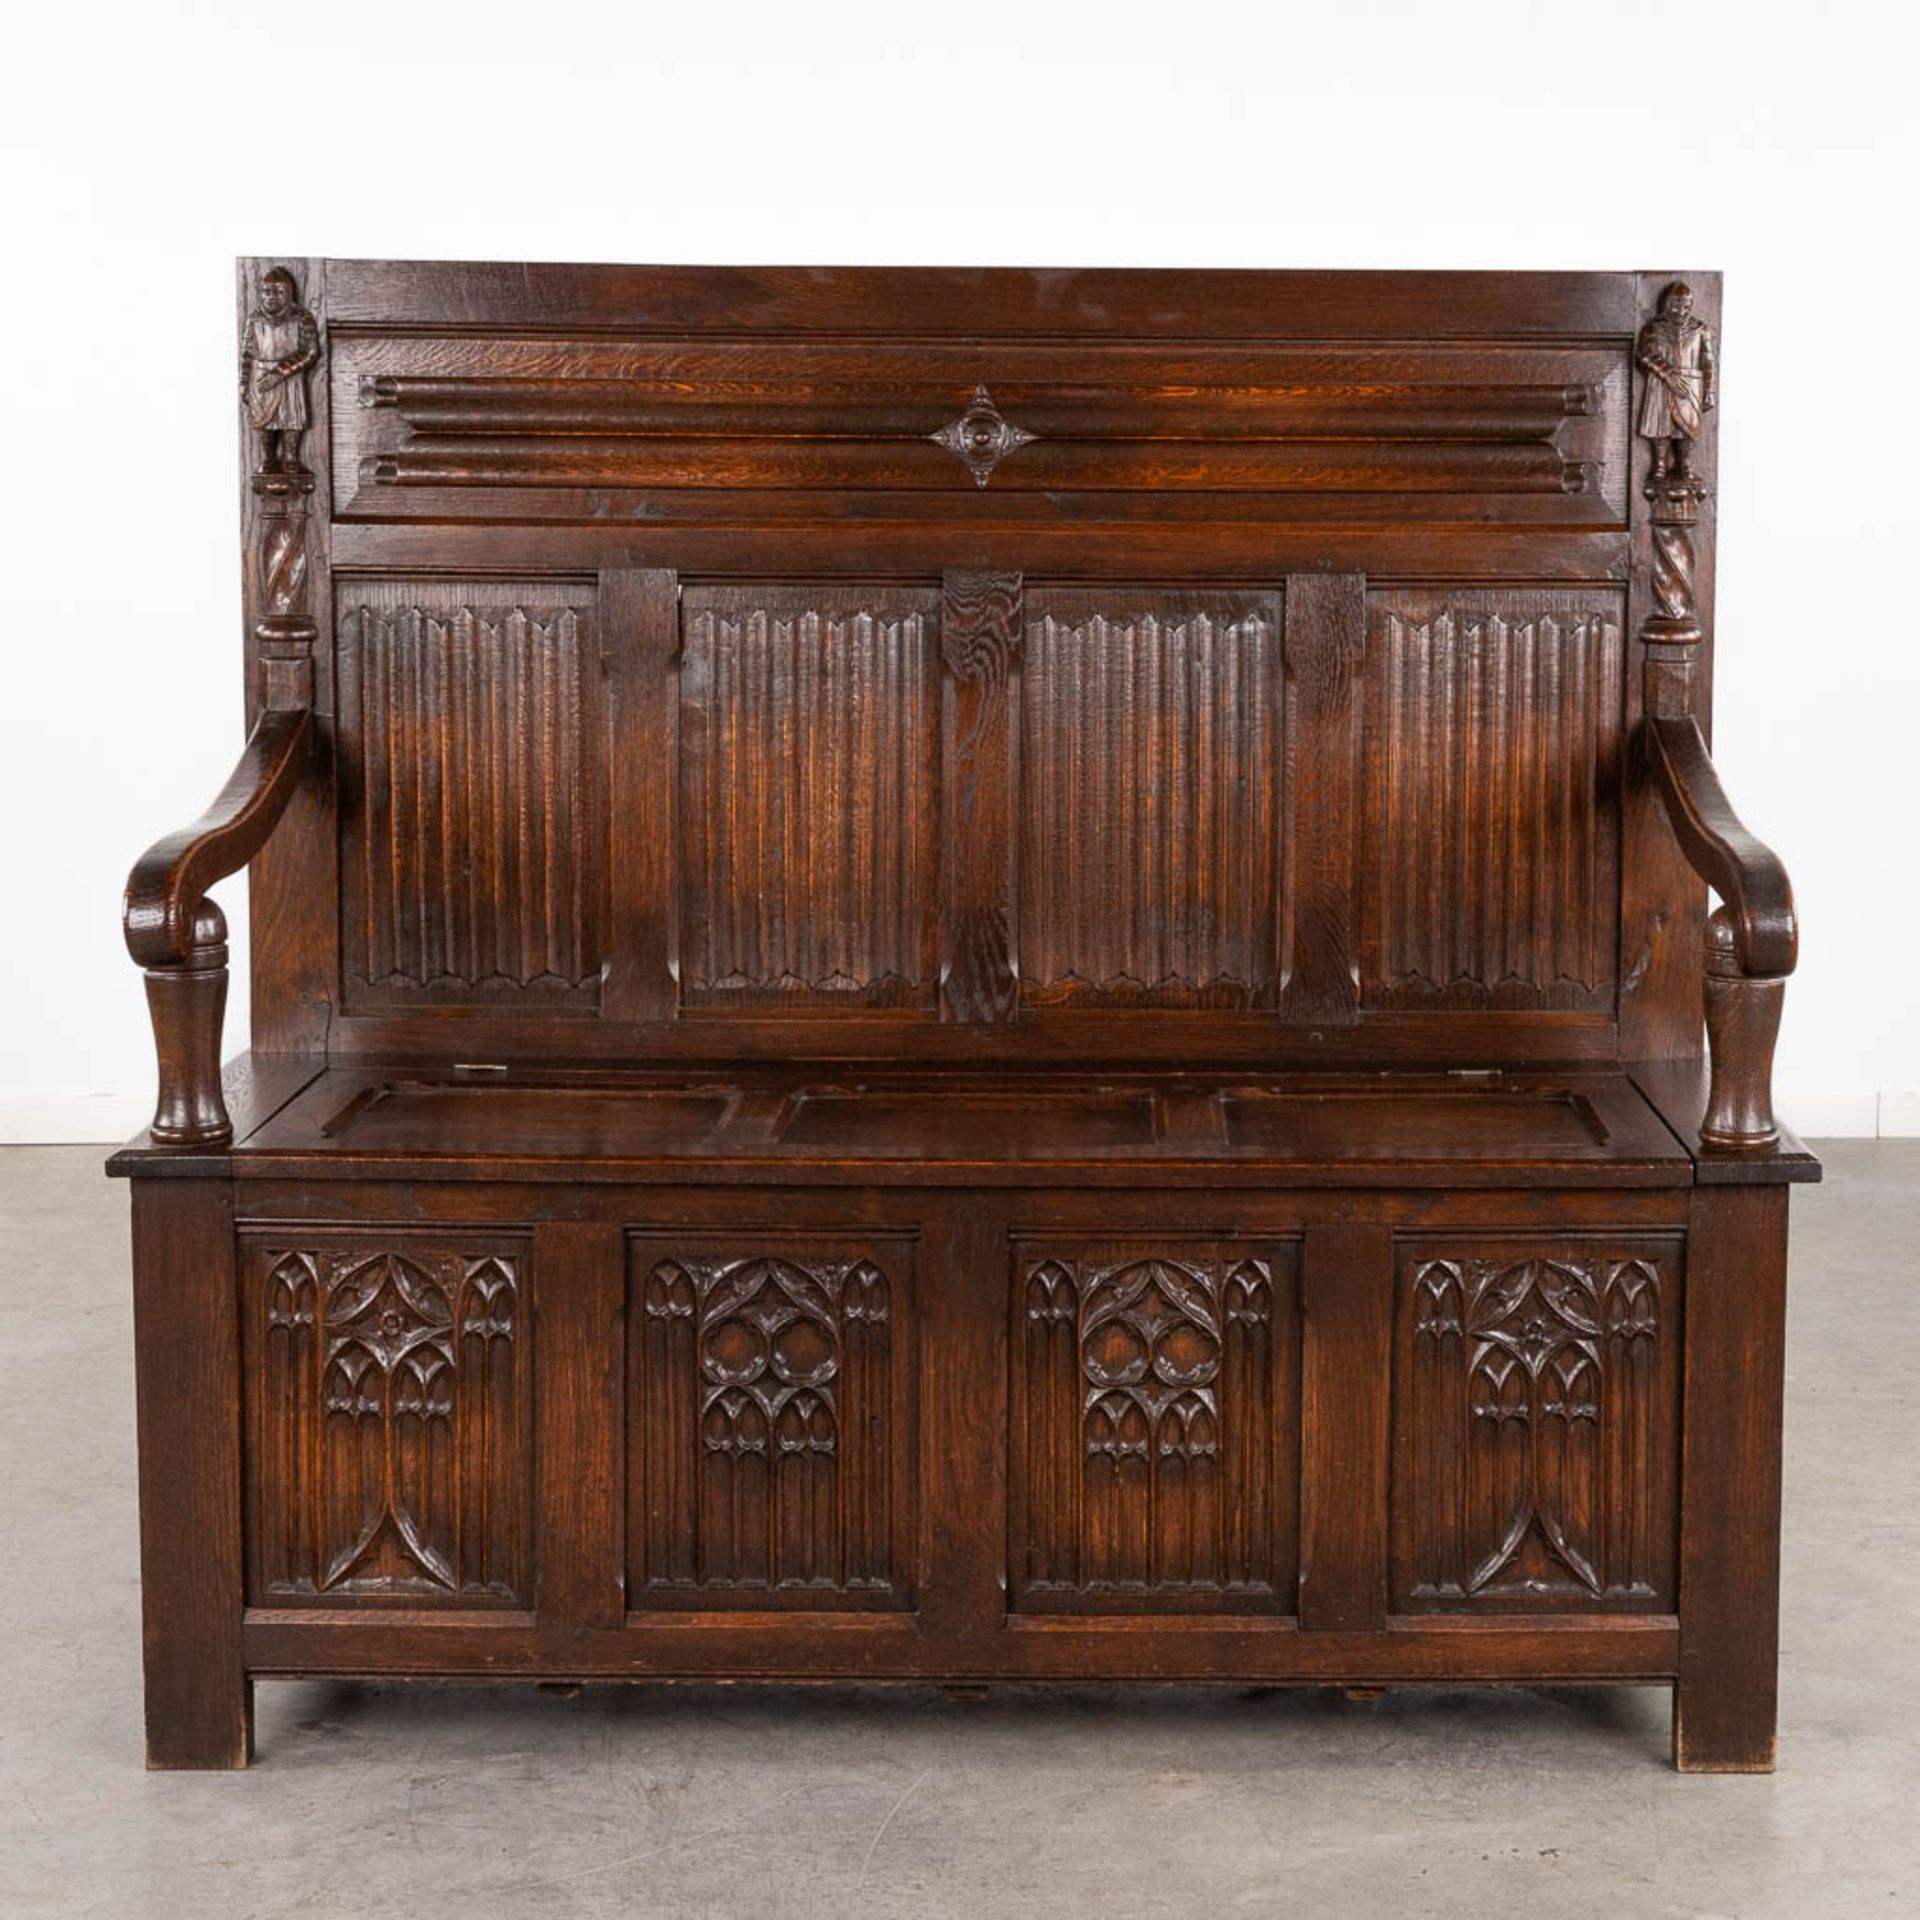 A hallbench with wood sculptures, oak, Gothic Revival. (D:54 x W:132 x H:120 cm) - Image 4 of 15